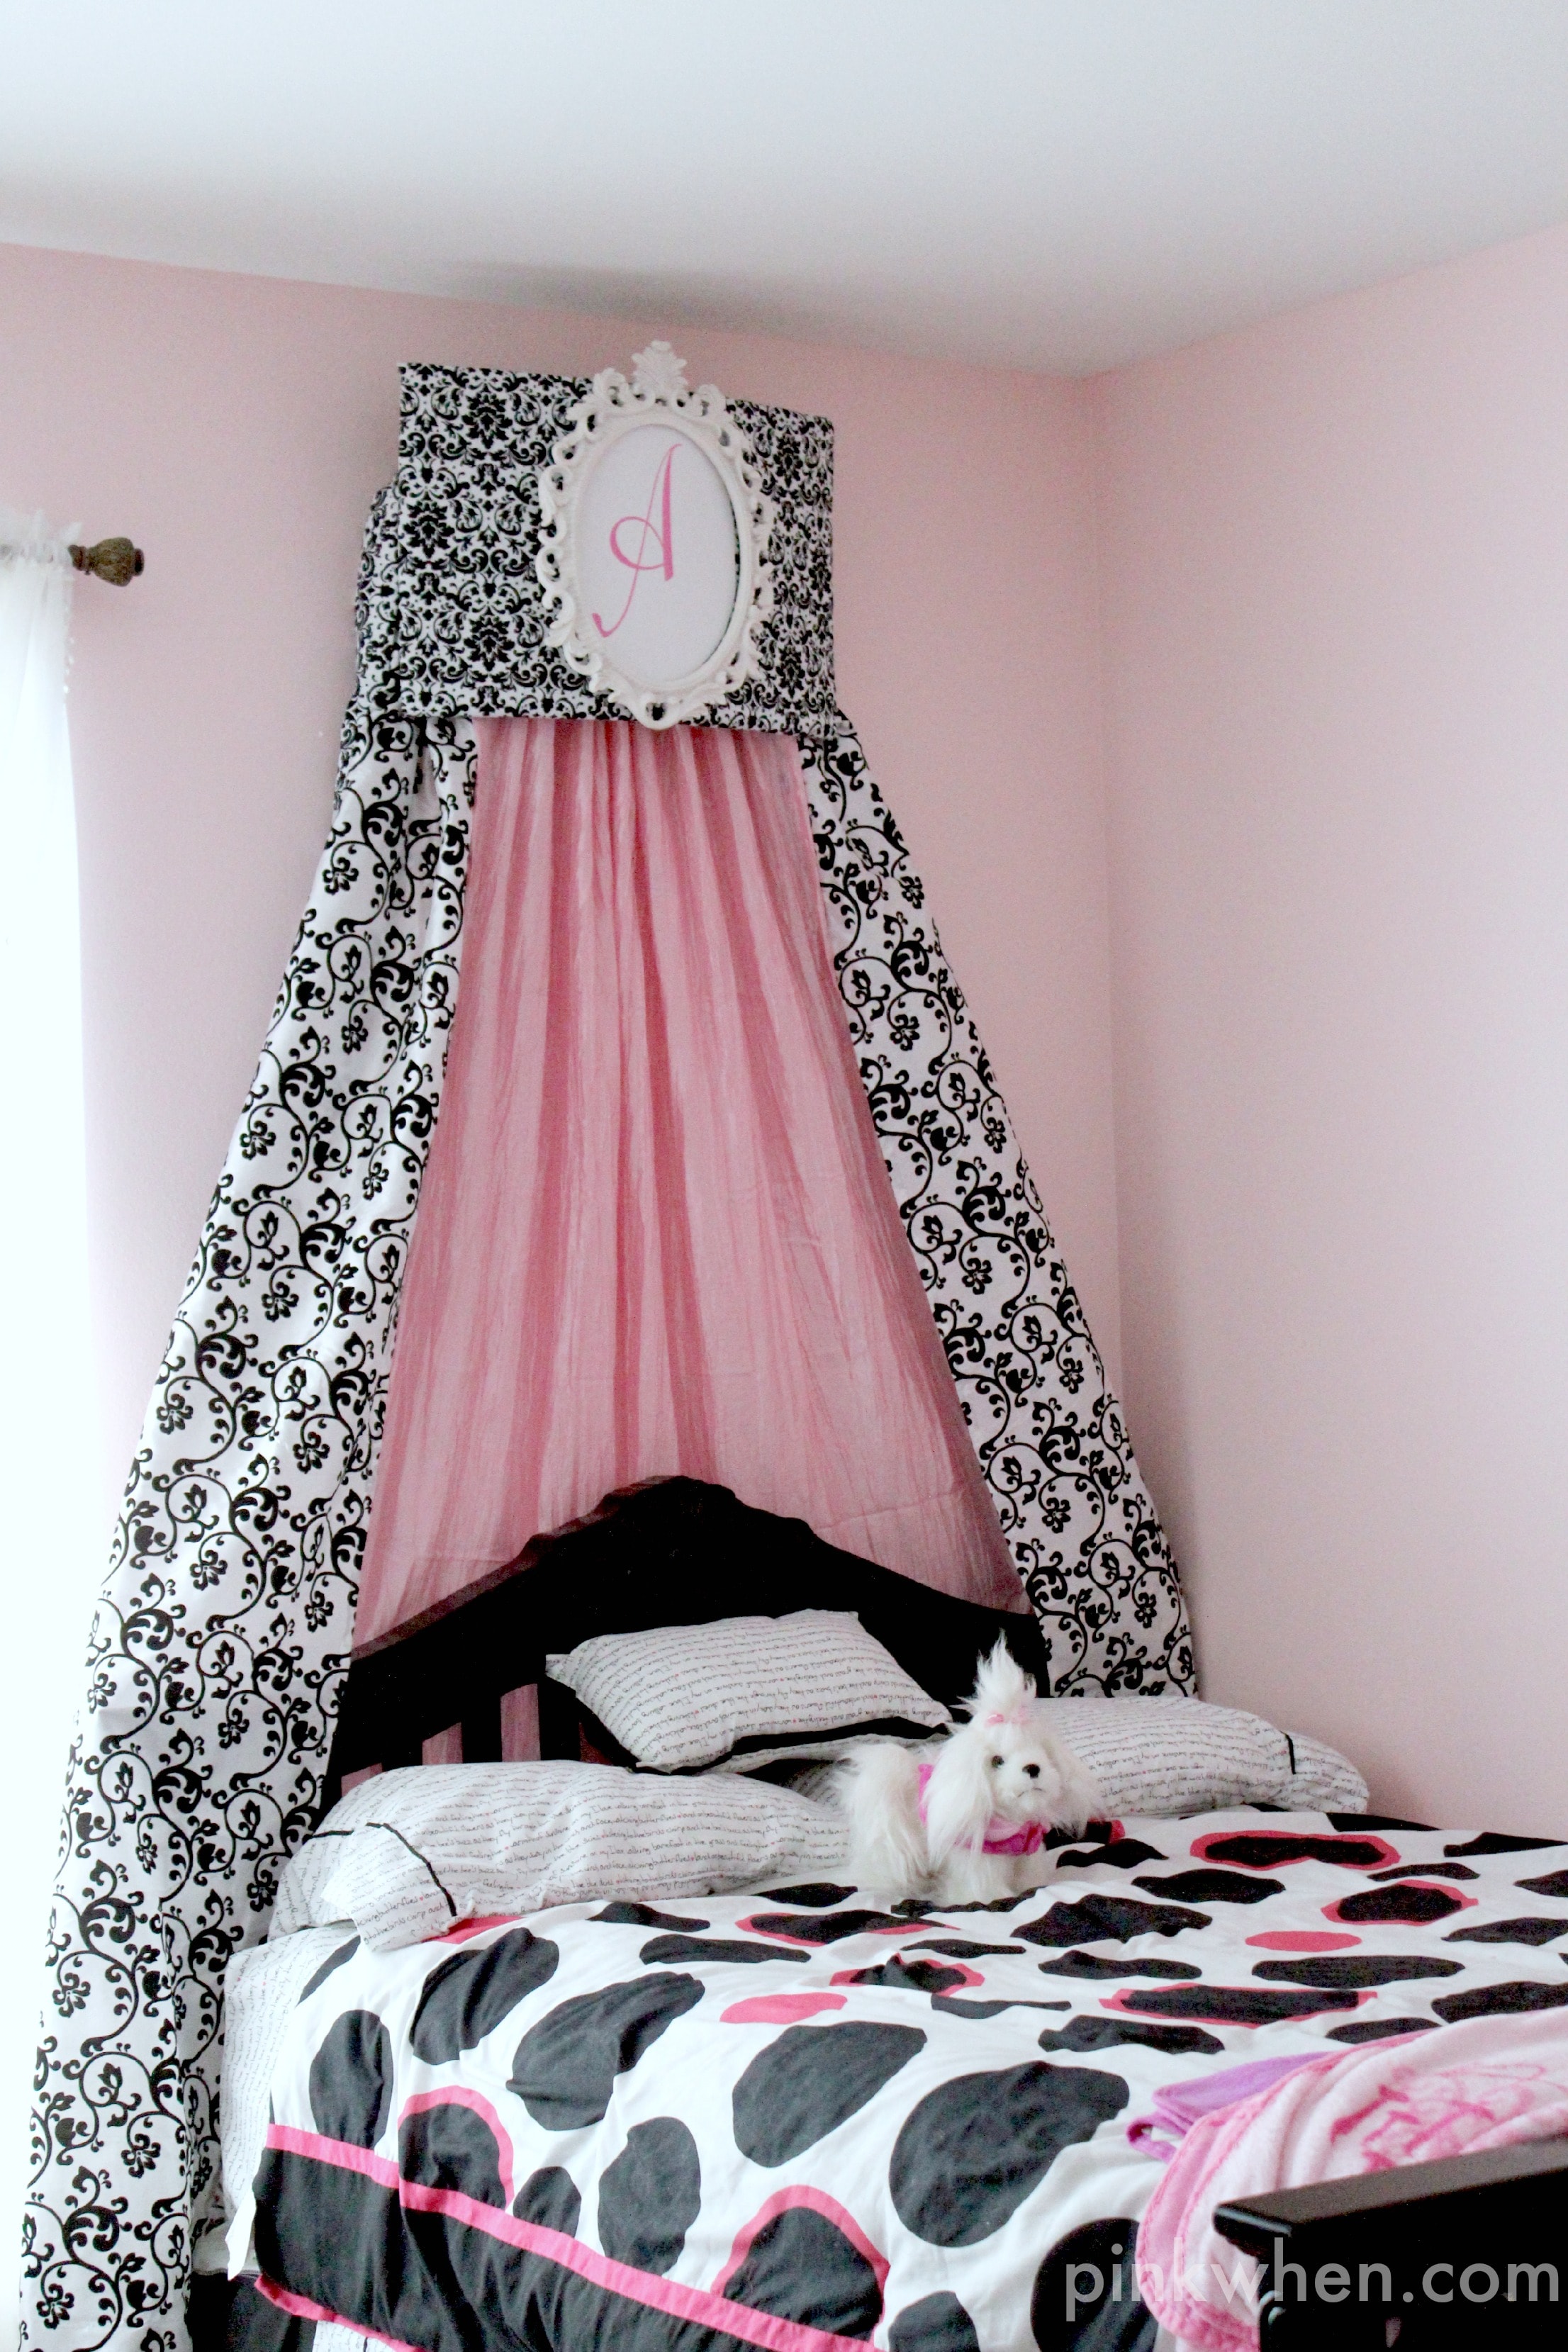 How to Make a Bed Crown Cornice via PinkWhen.com